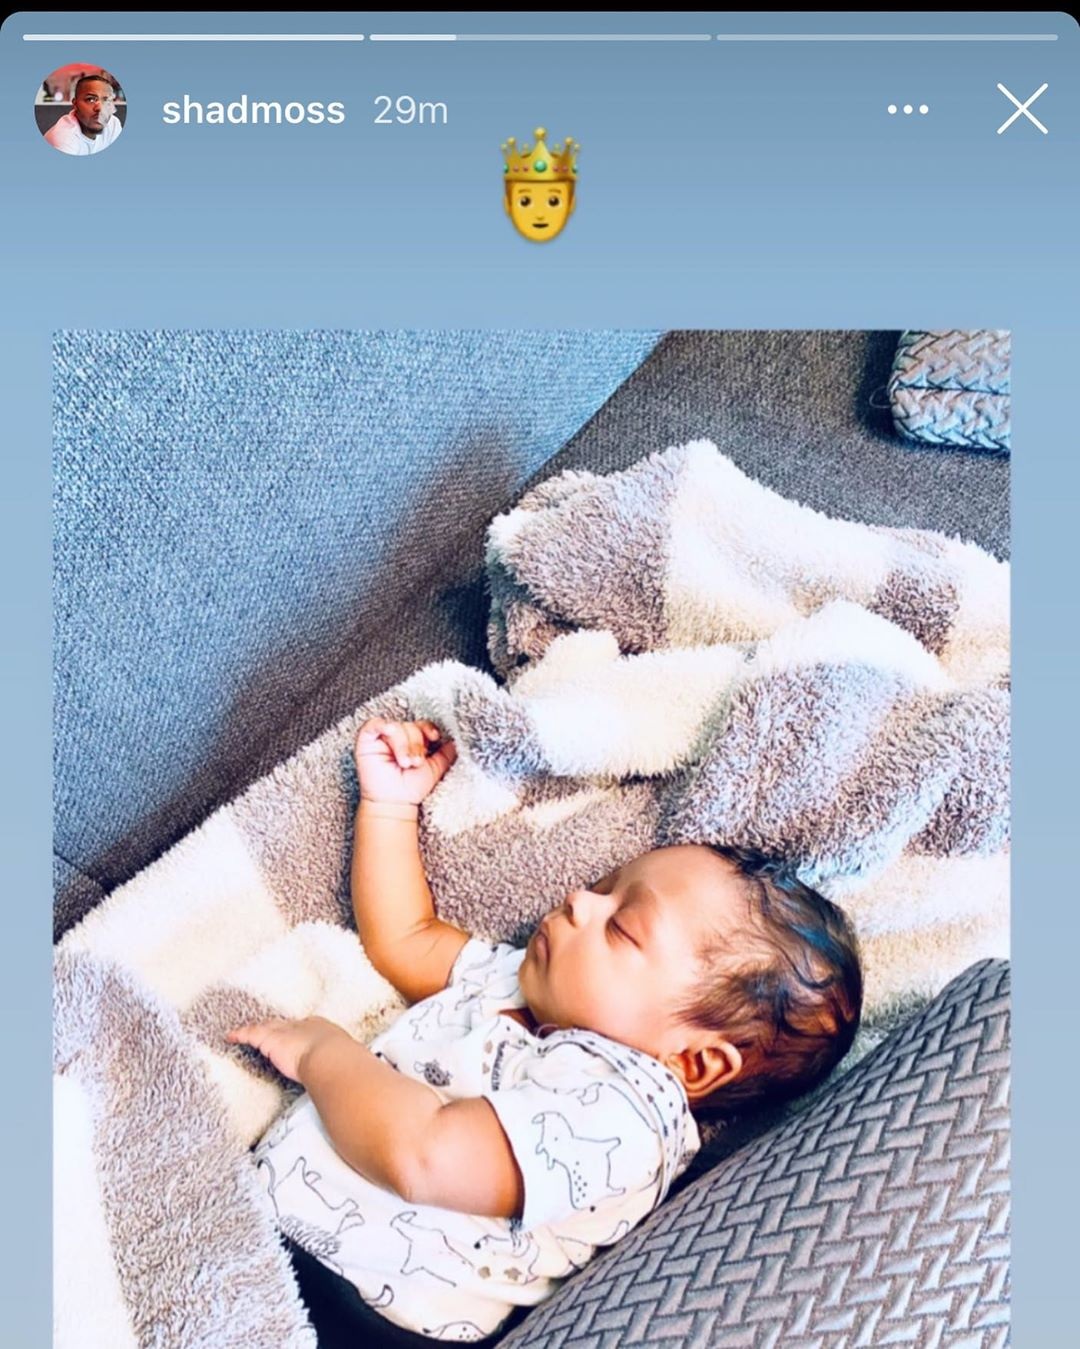 Bow Wow, for months, has been Olivia Sky (@olivia.sky) baby daddy. These rumors have been led by Olivia Sky, herself, who said Bow Wow was her son's father. Given how people have a tendency to exaggerate, many didn't know if she was telling the truth, but Bow Wow has now posted the child on his Instagram, confirming the rumors.